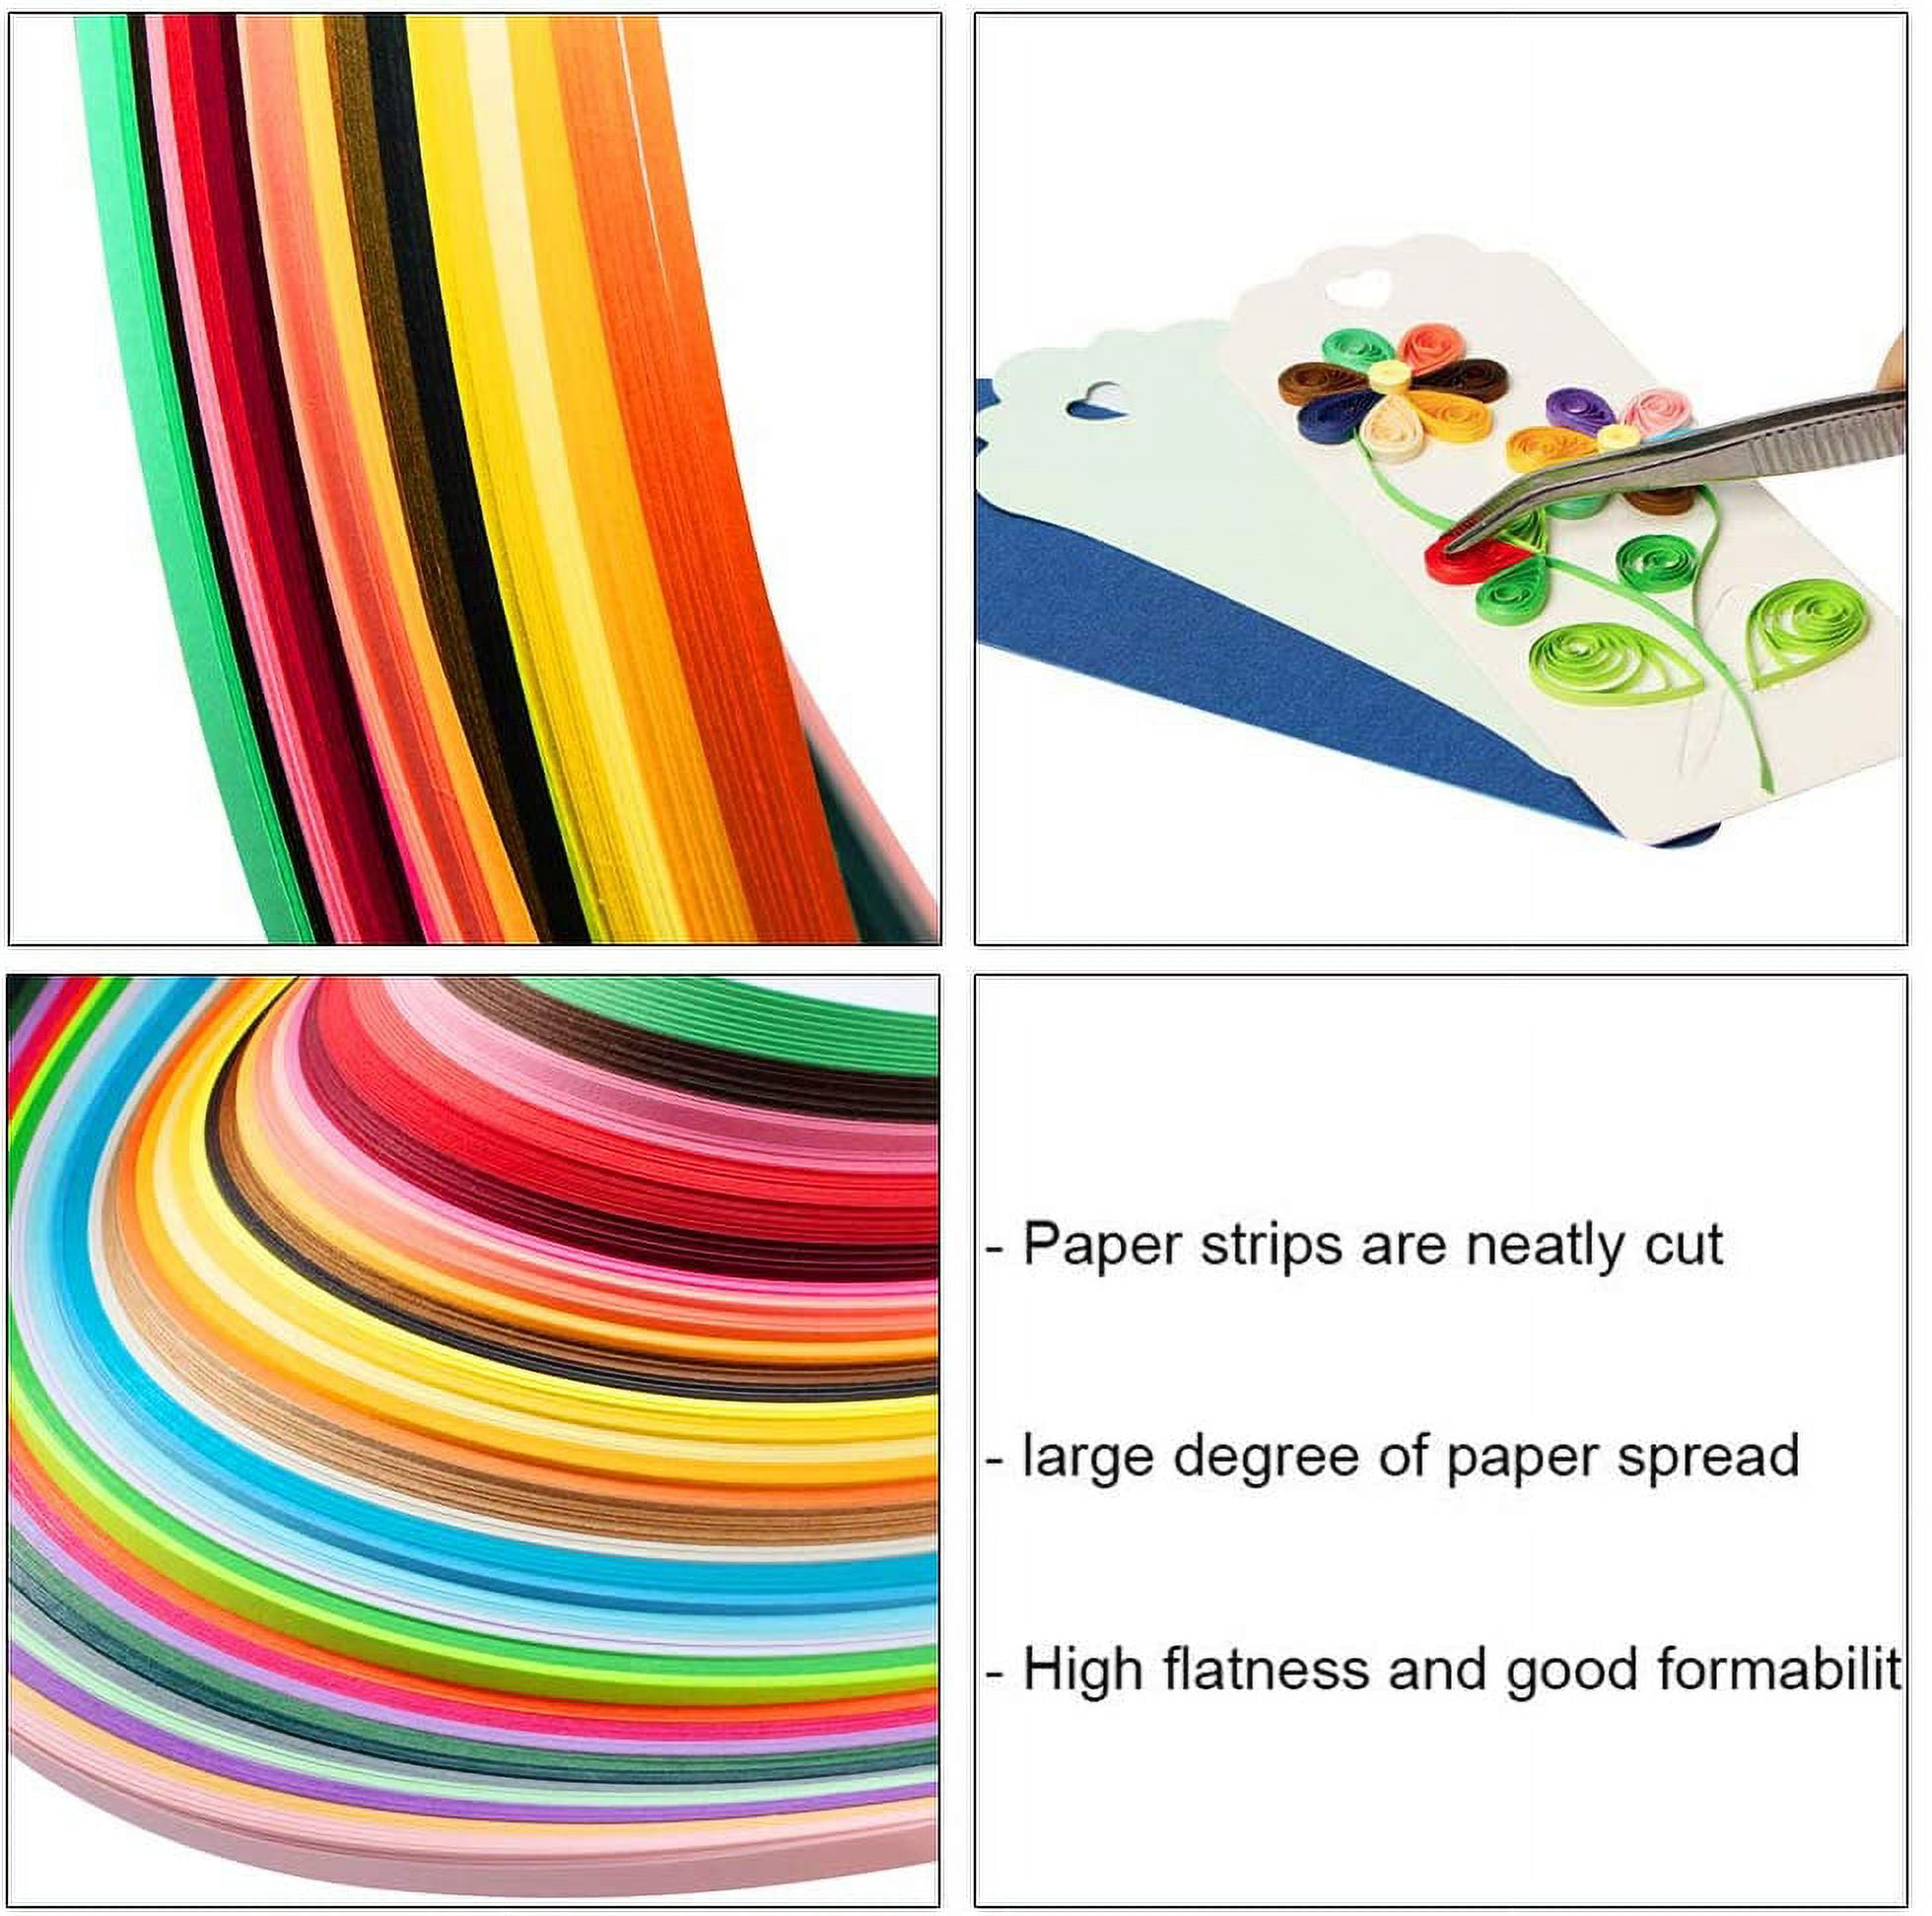 Aofieijew 9 Pack 3mm/5mm Quilling Paper Quilling Strips 900 Stripes Length  39cm for Hand Craft Decoration (3mm Paper Stripes)